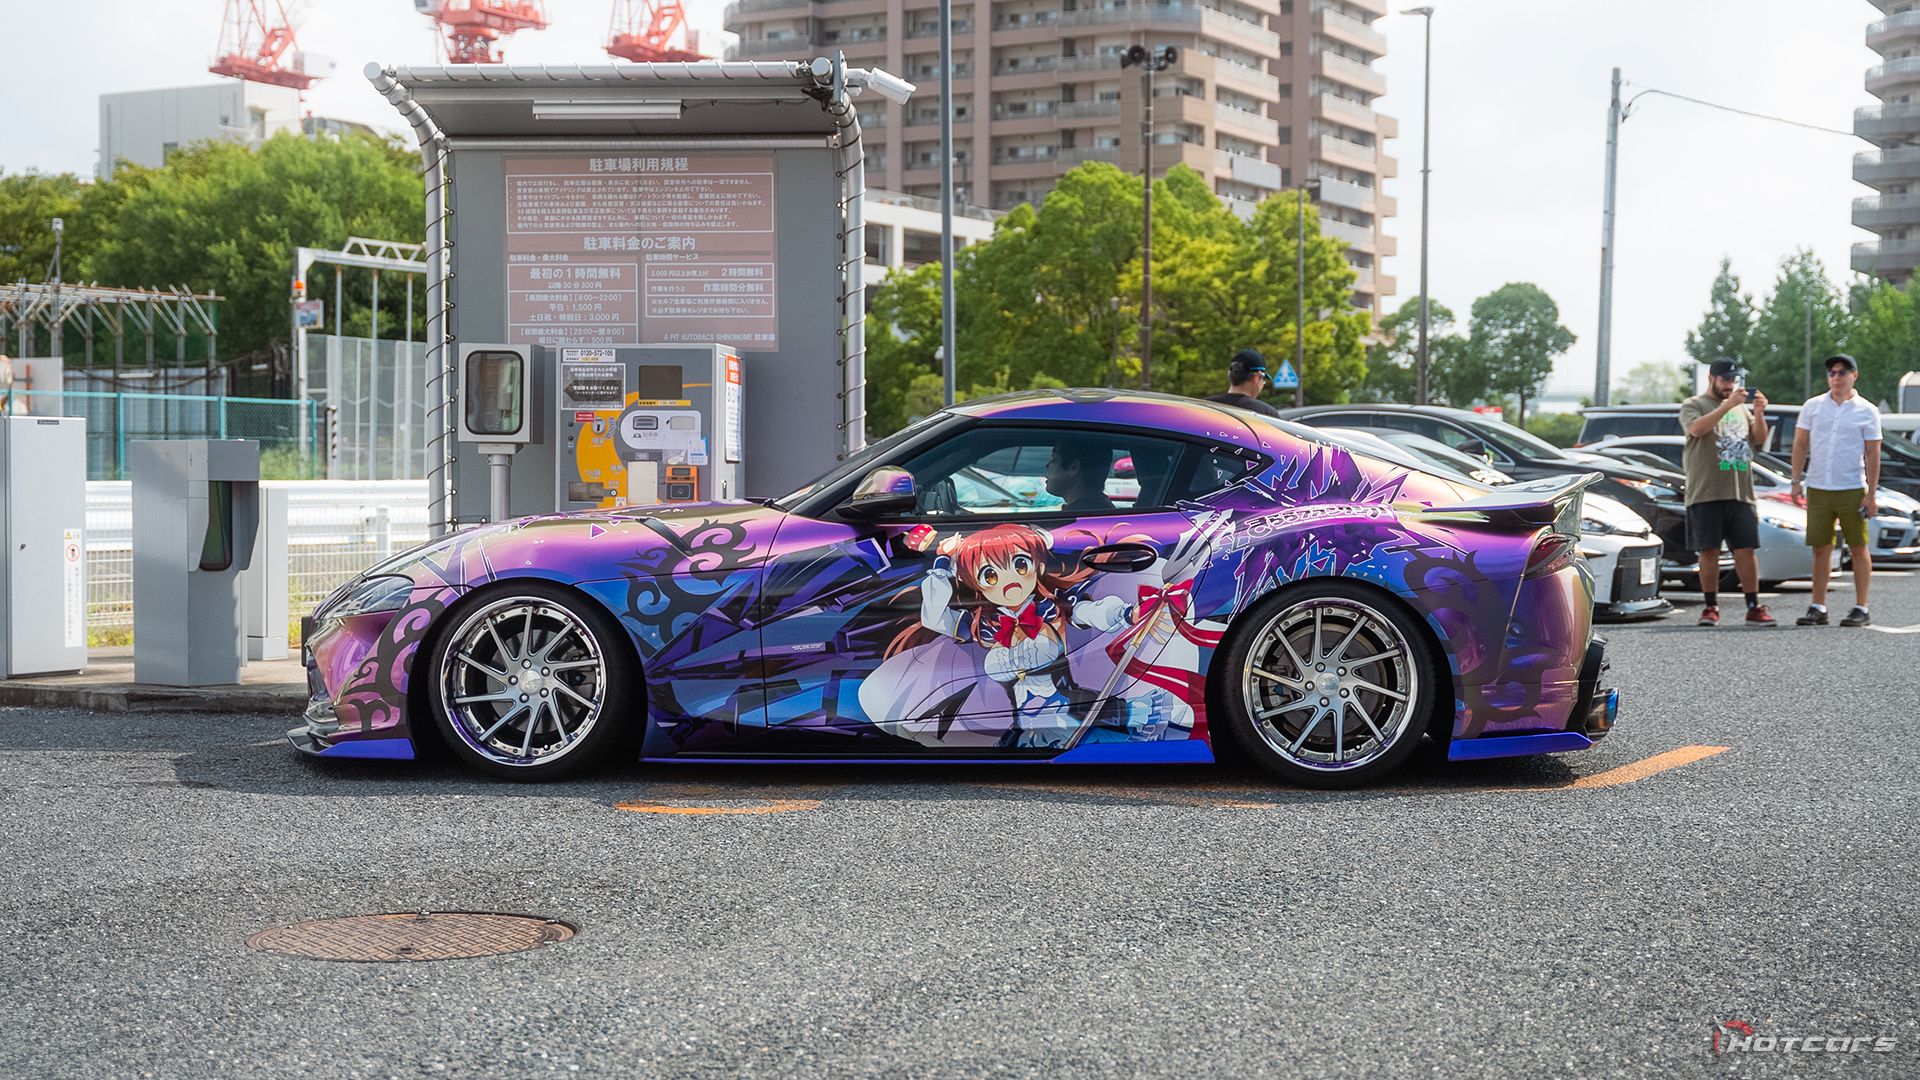 10 Anime Racers & The Real Life Cars They'd Drive